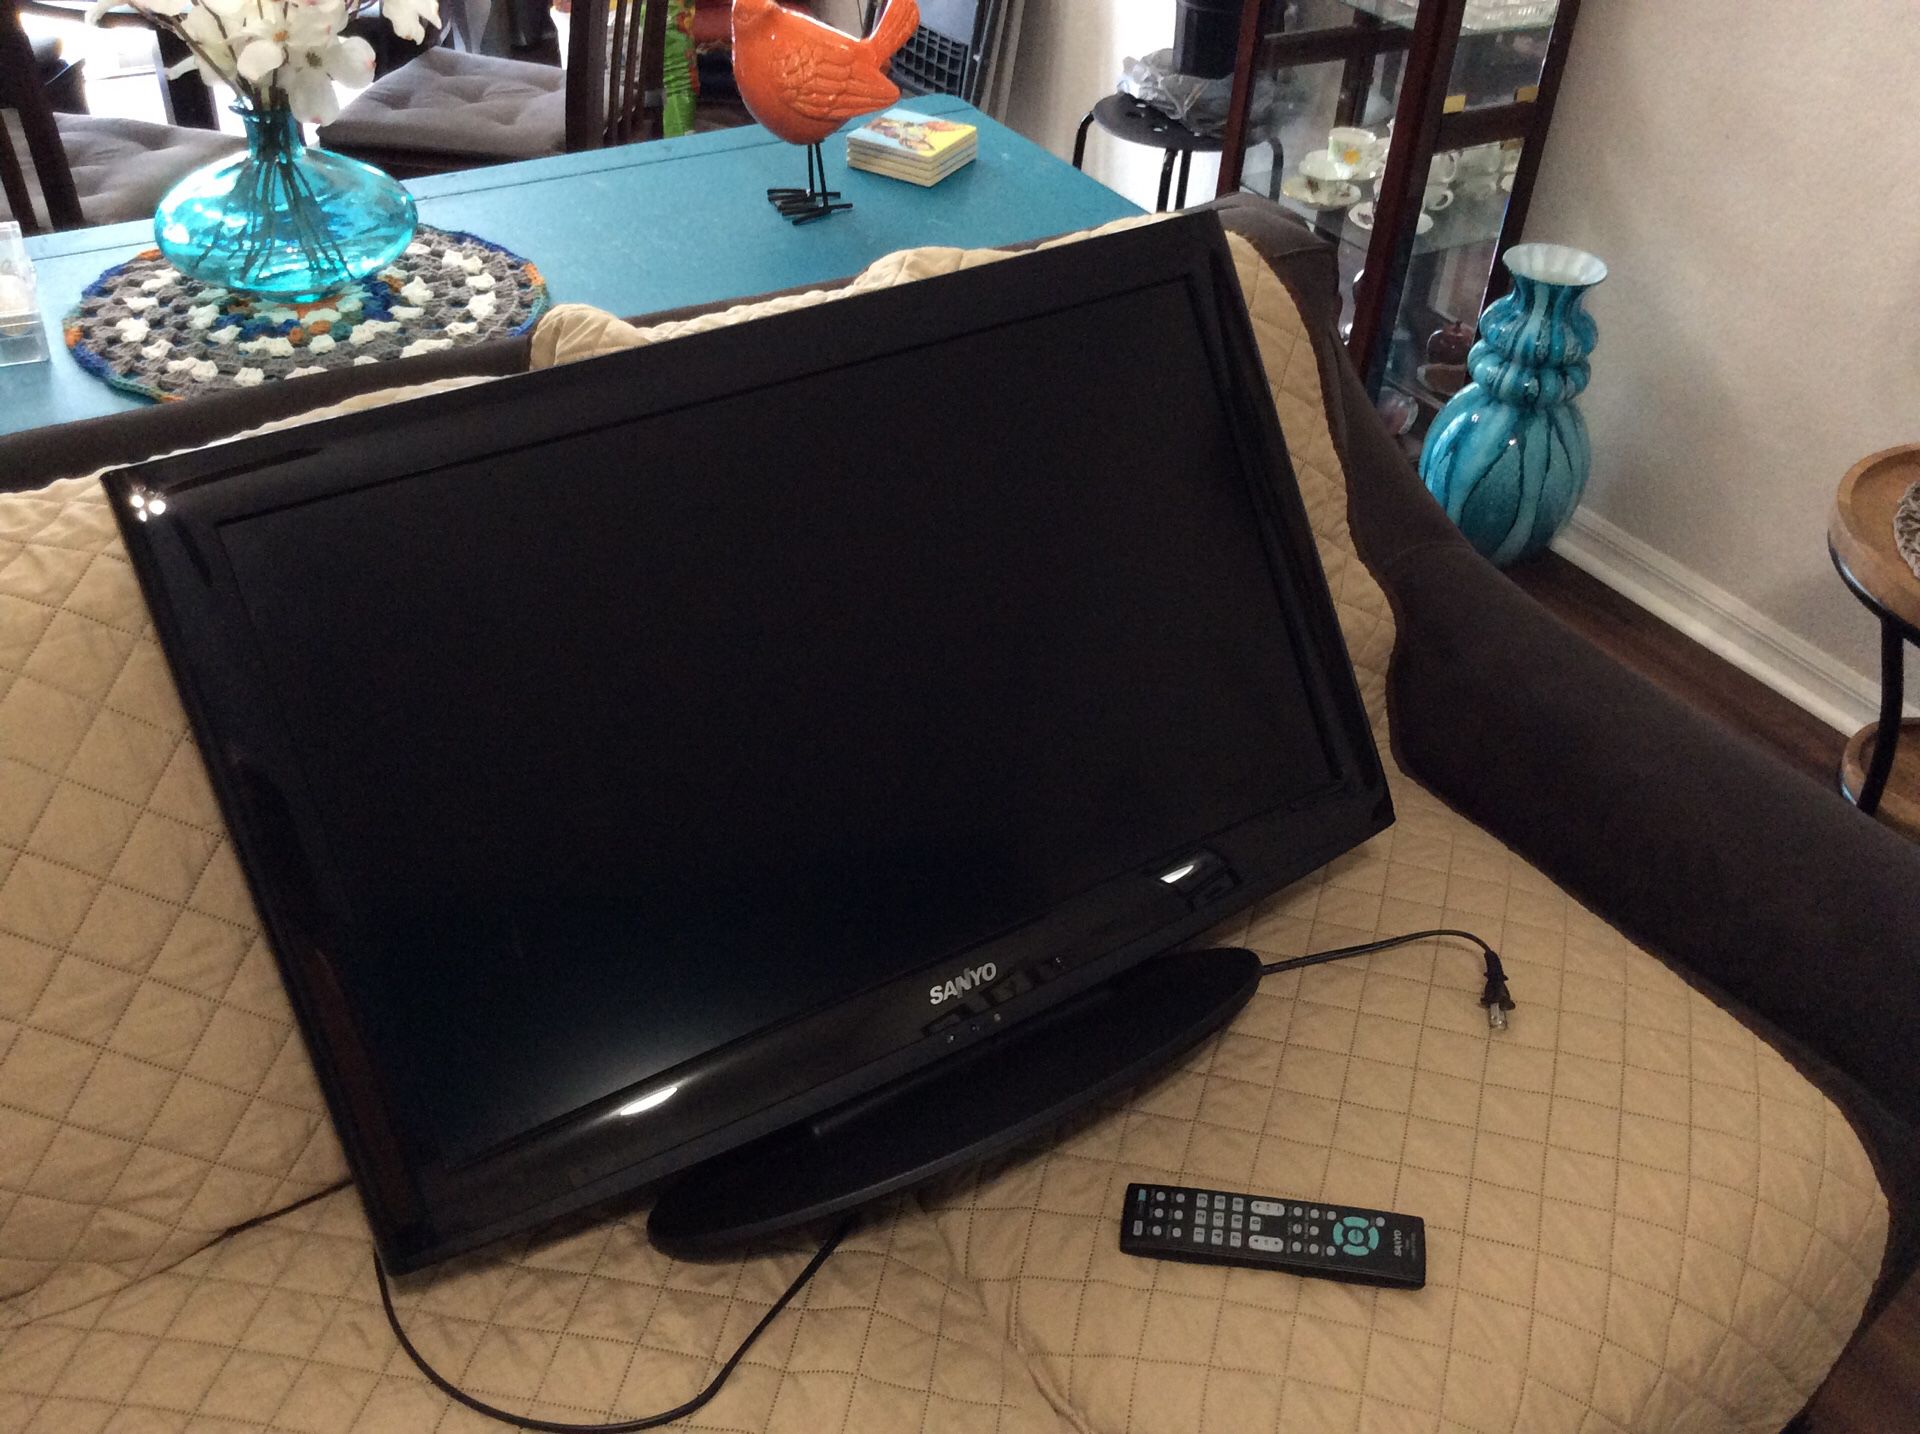 Sanyo 32” HDTV LCD TV good for a kids room to hook up games board or just use with any connection you may have. In very good condition ,rarely used